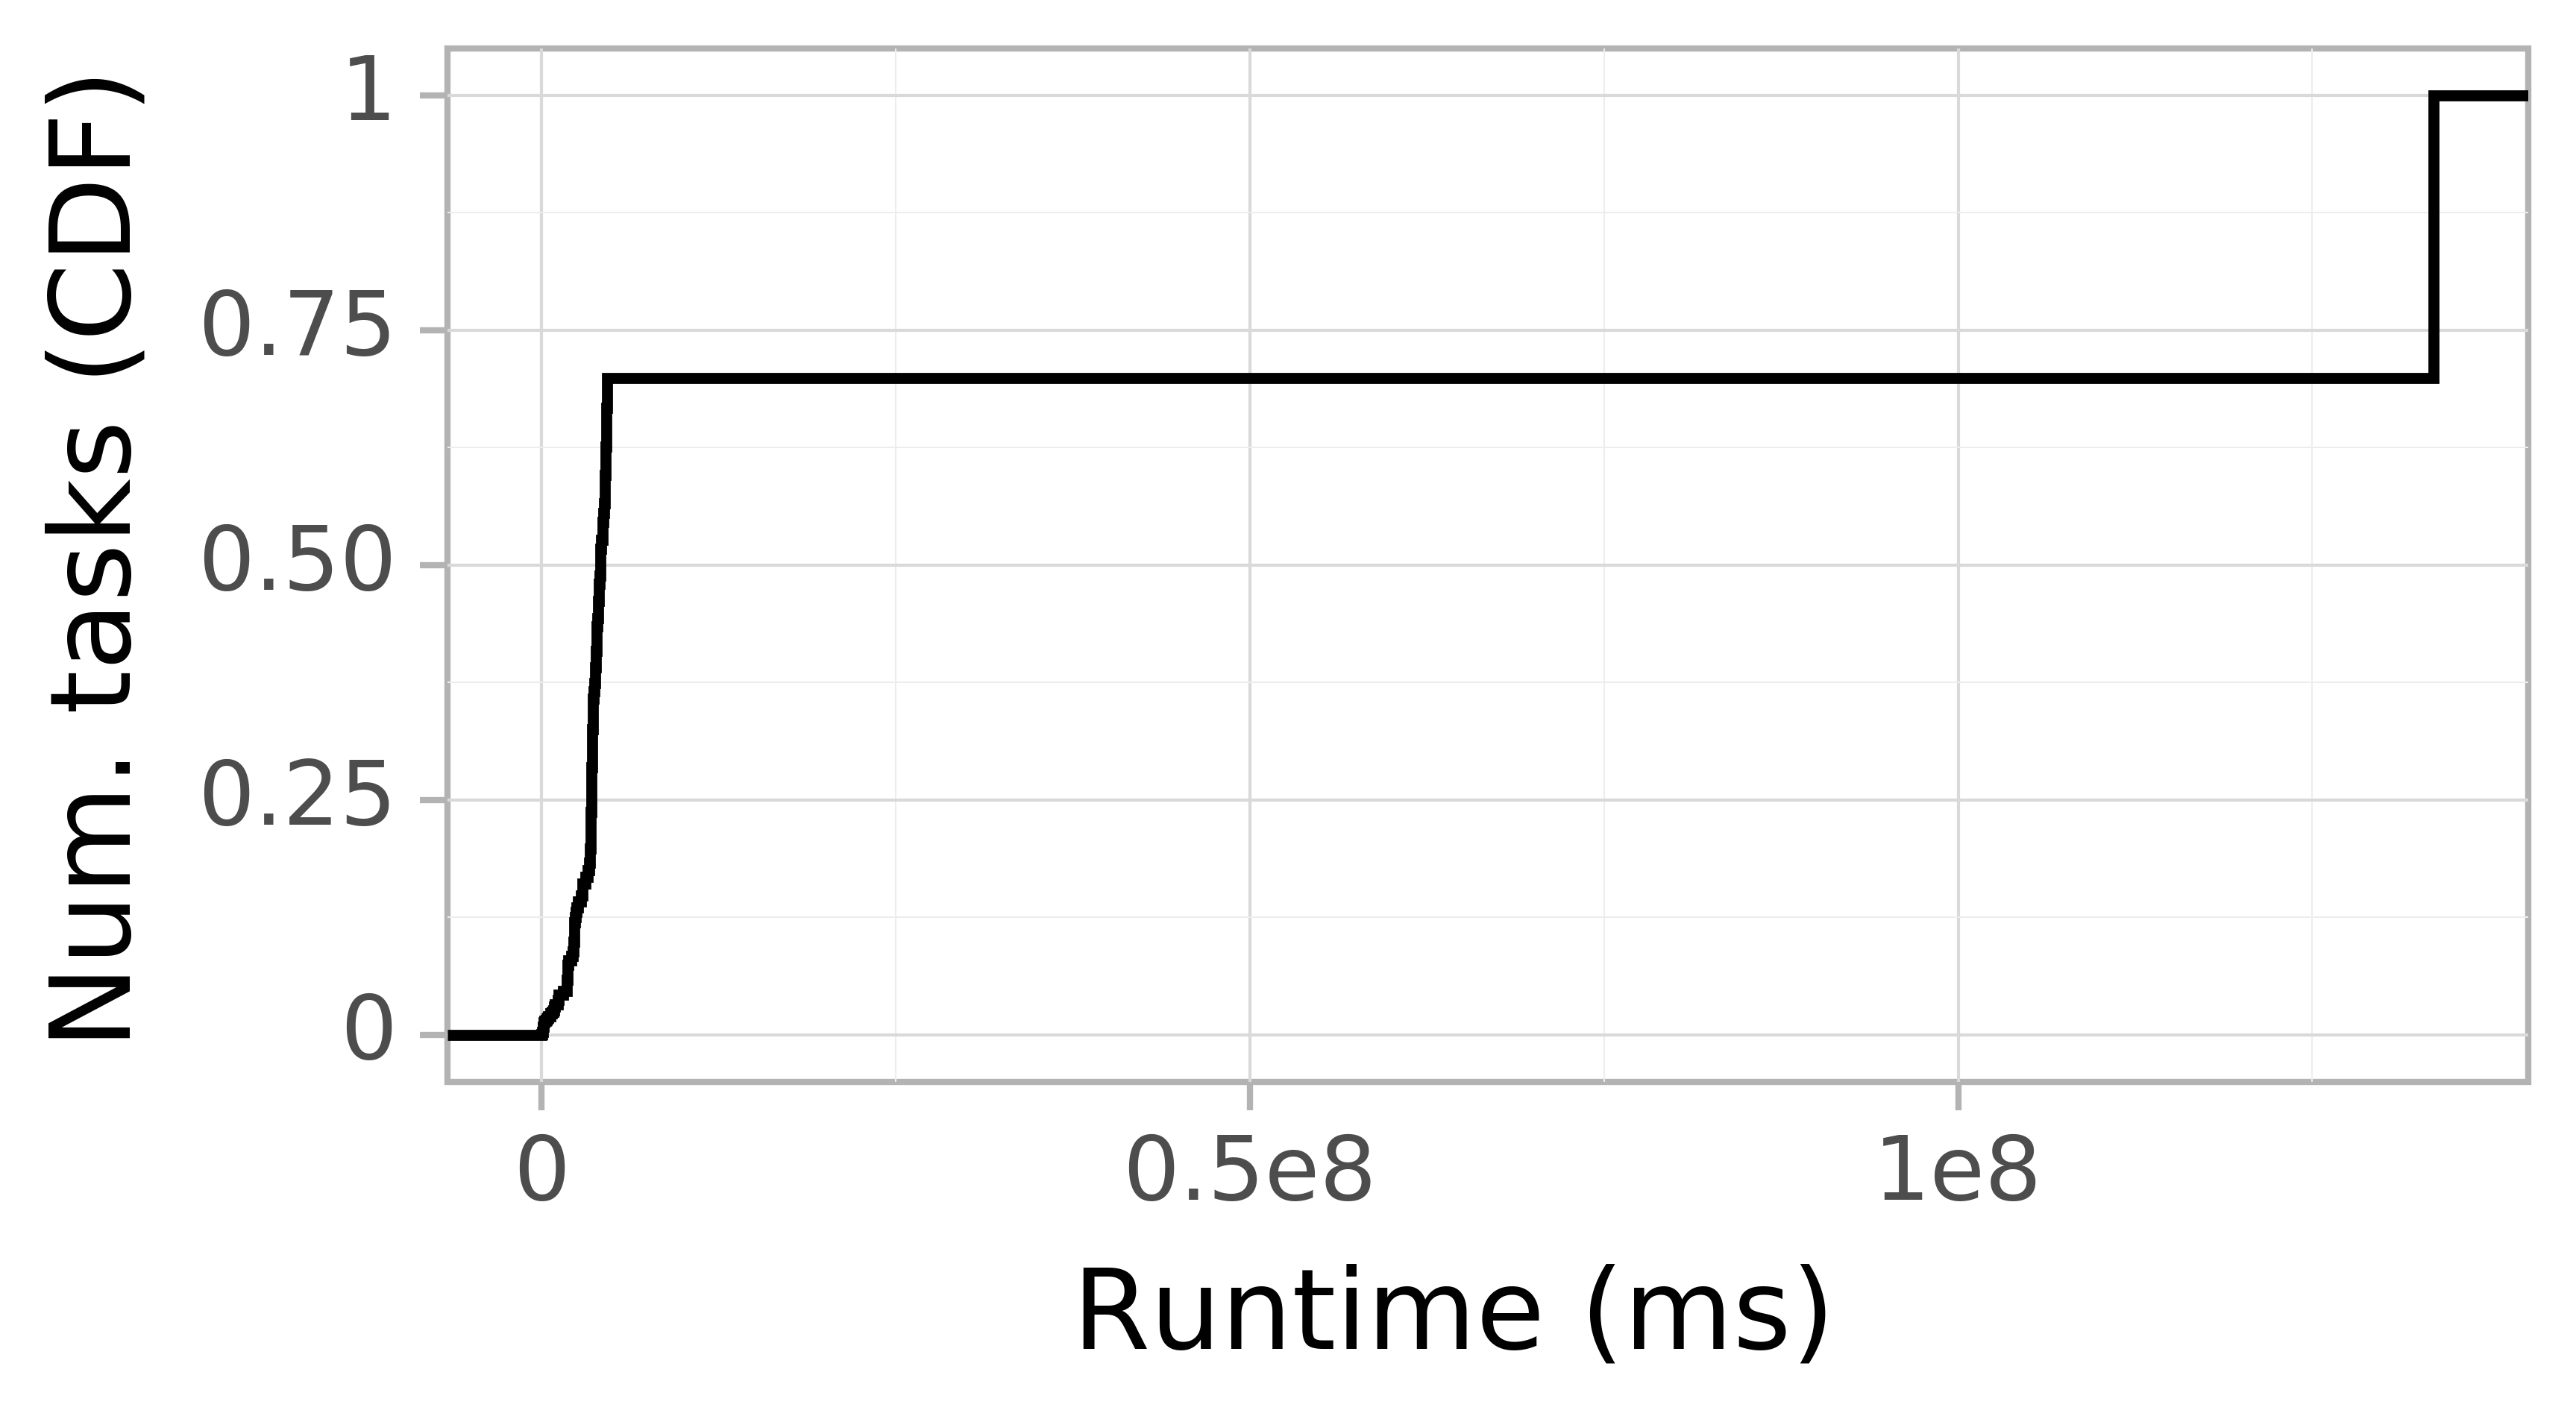 Task runtime CDF graph for the Pegasus_P7 trace.